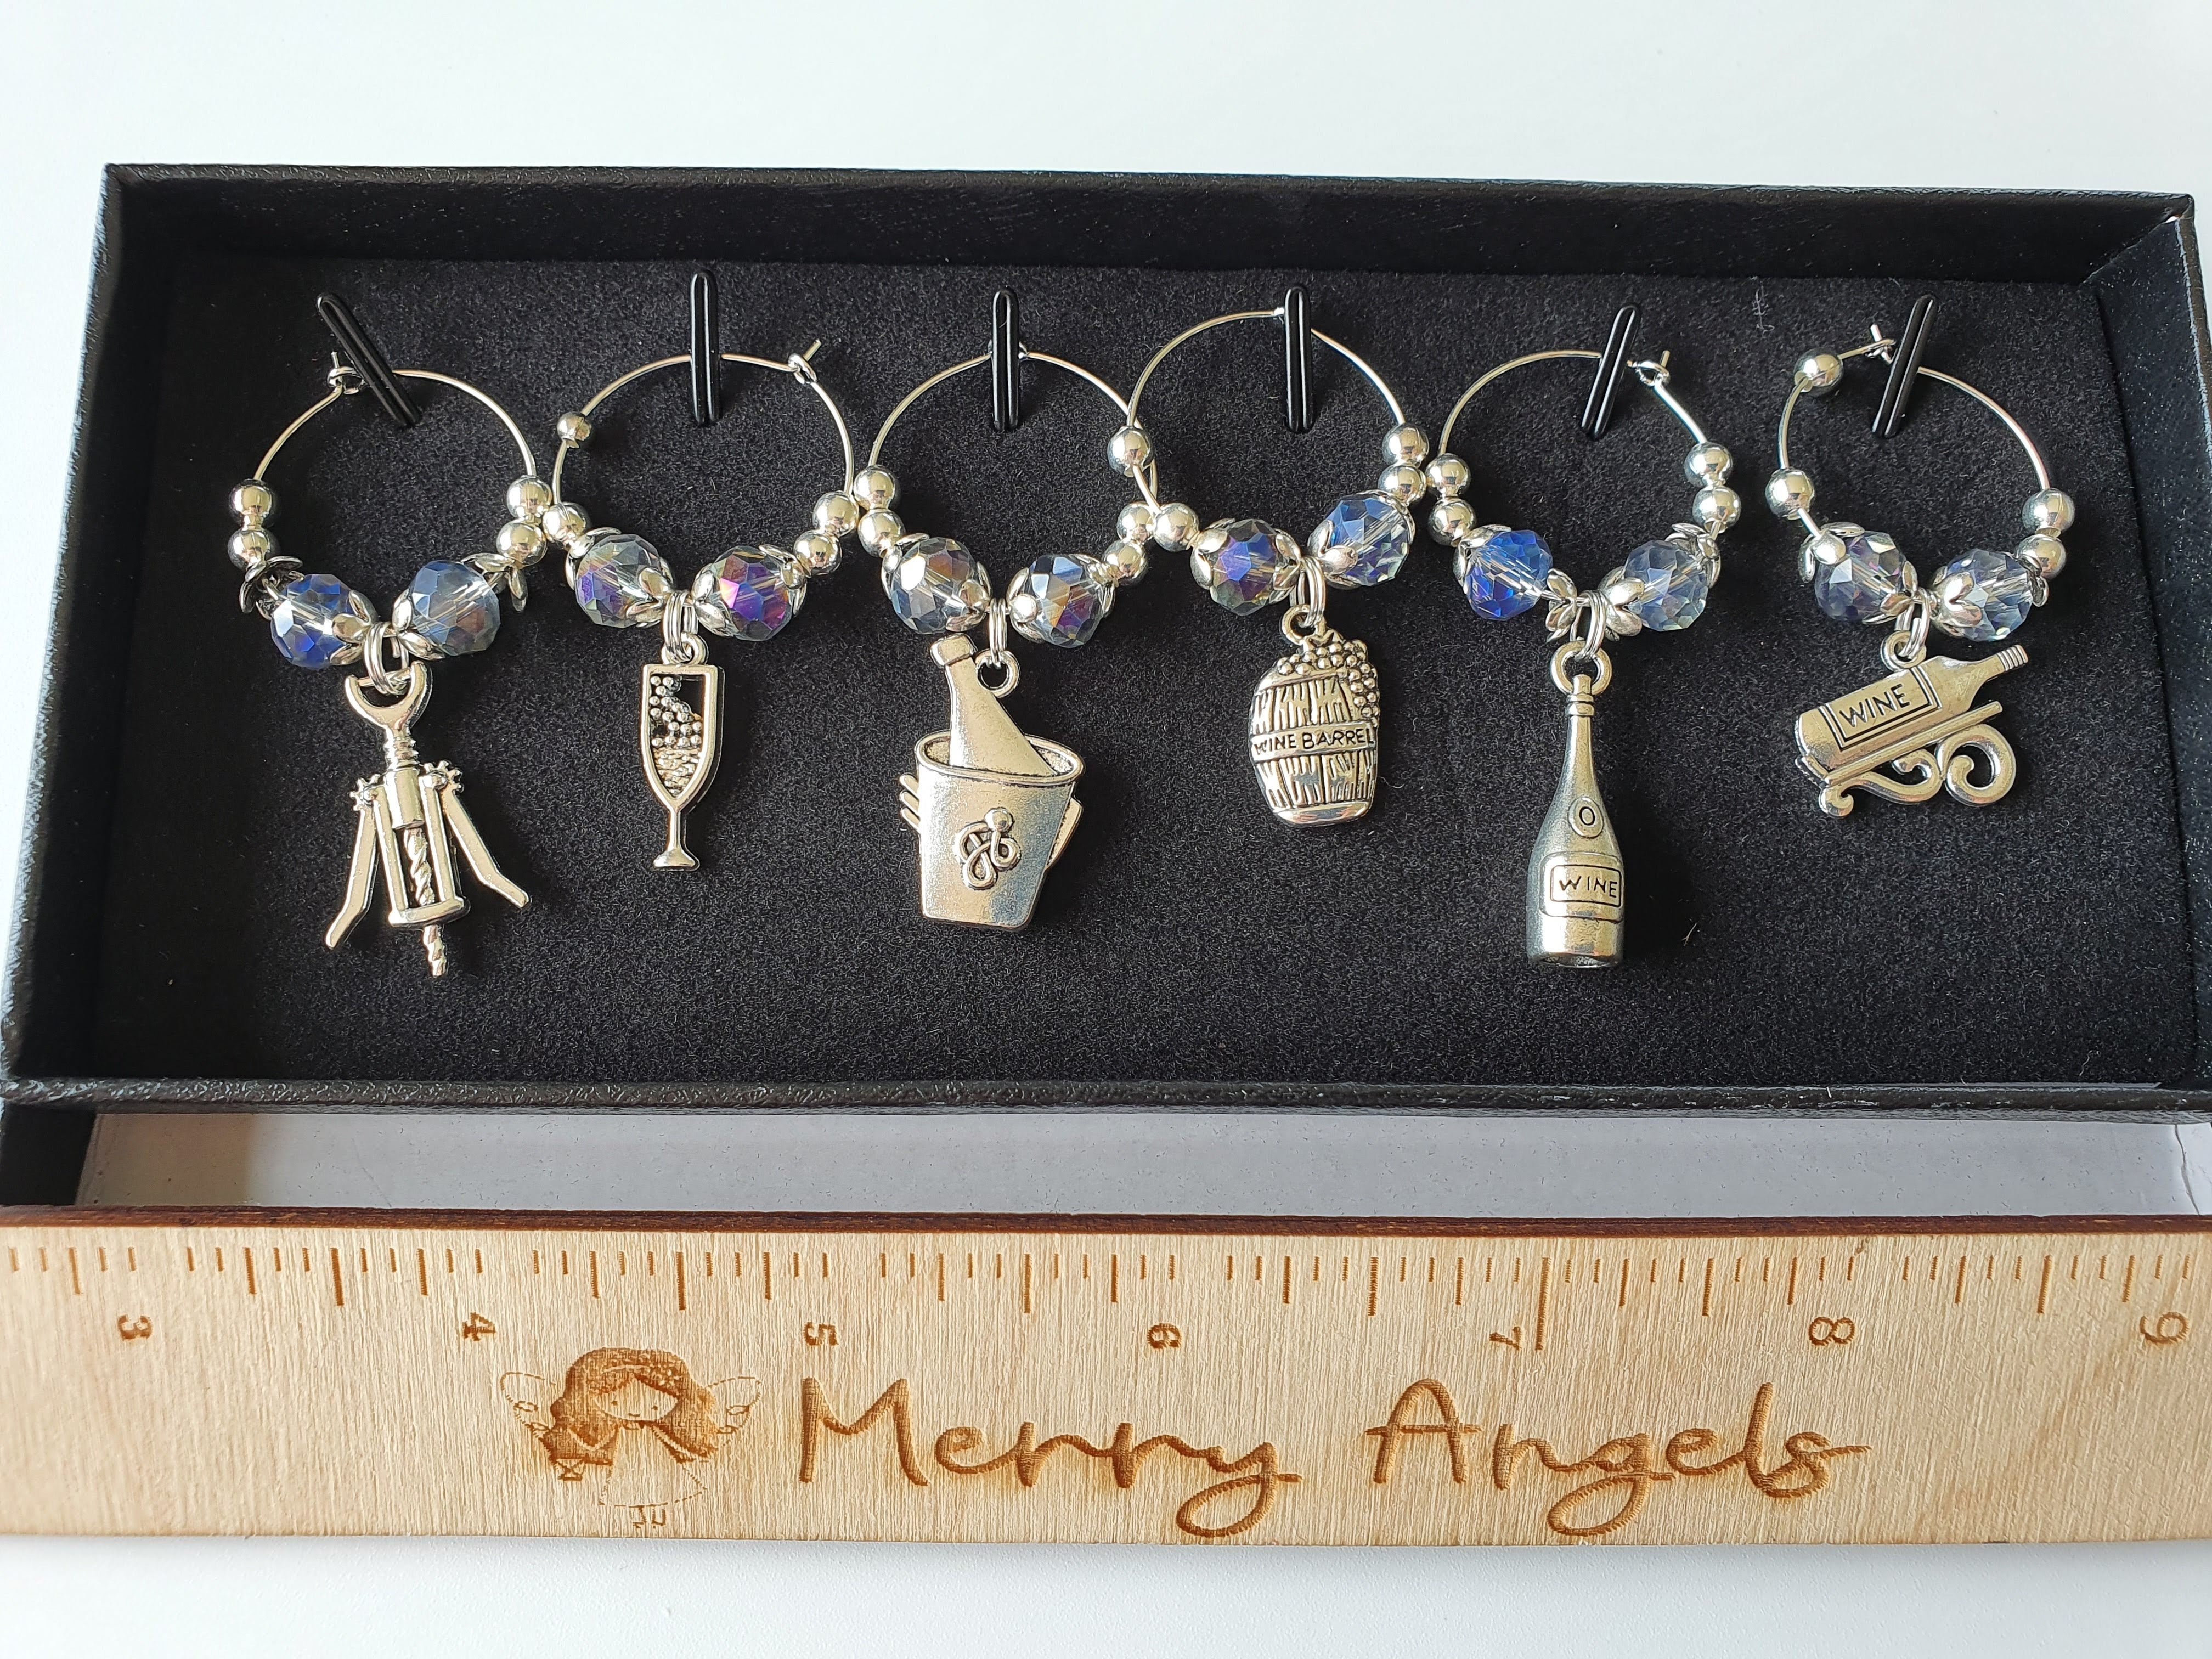 A set of 6 silver wine glass charms.